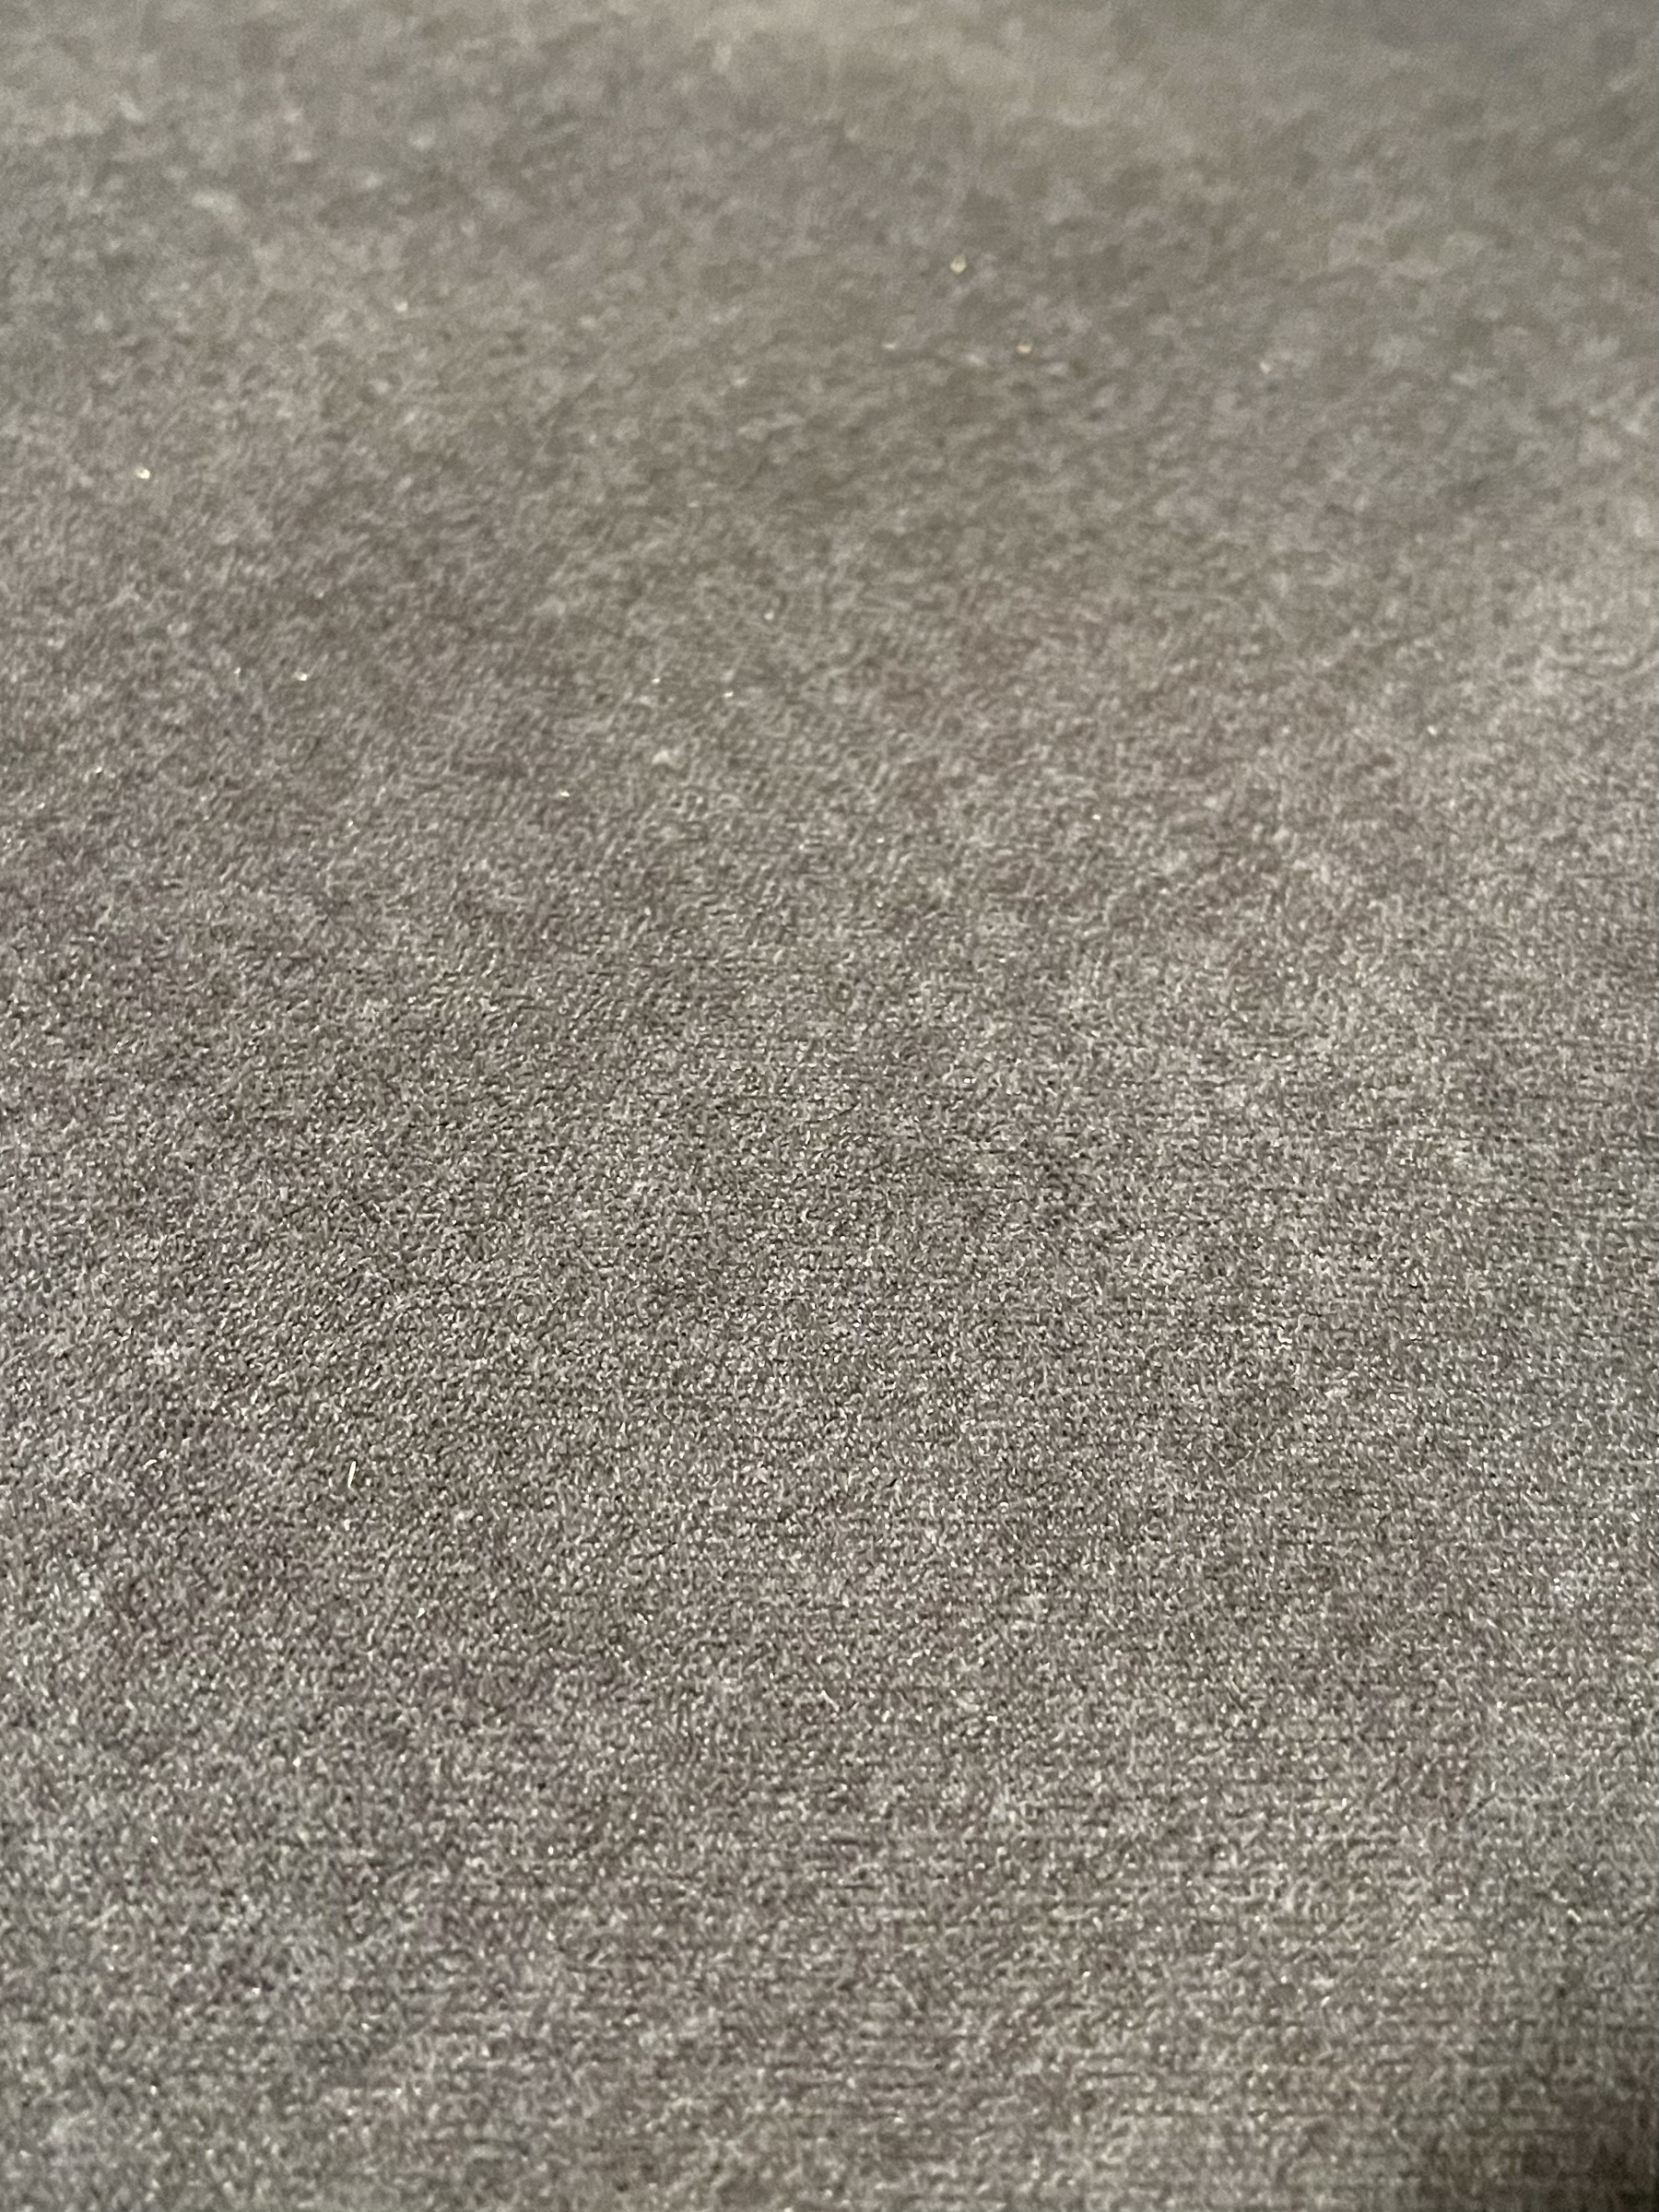 Close up of chair fabric